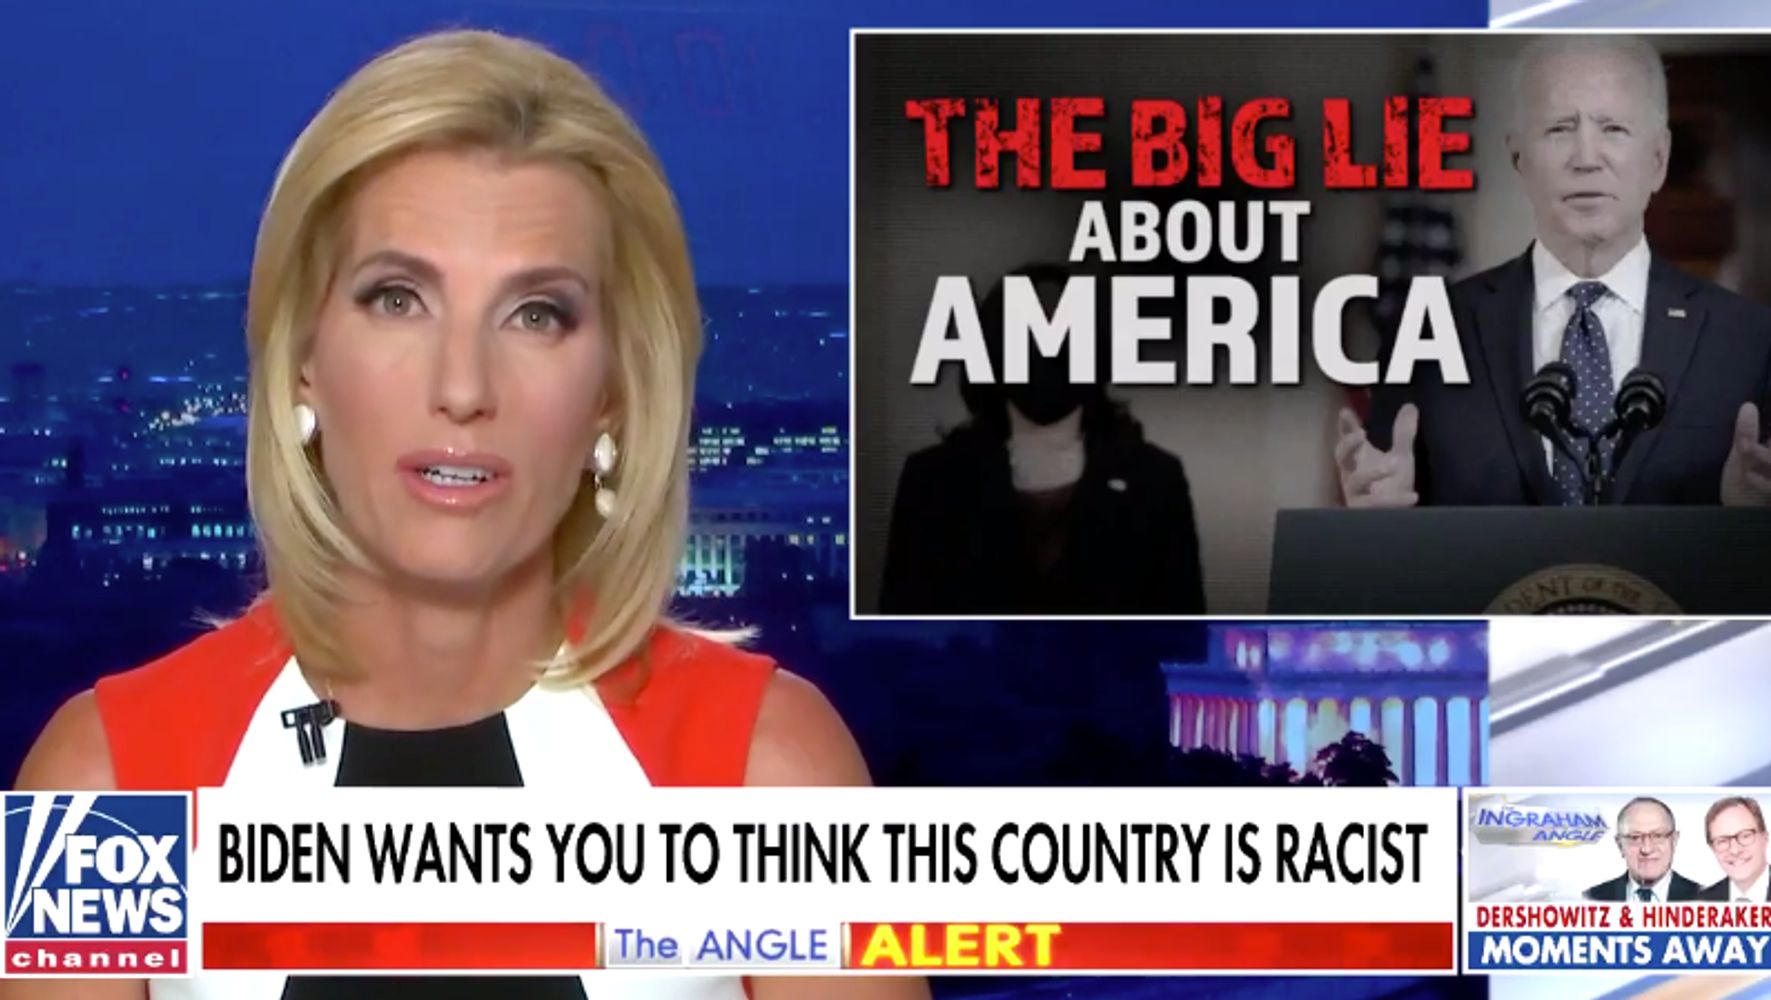 Laura Ingraham Spins Chauvin Conviction, Claims Systemic Racism Is ‘The Big Lie’